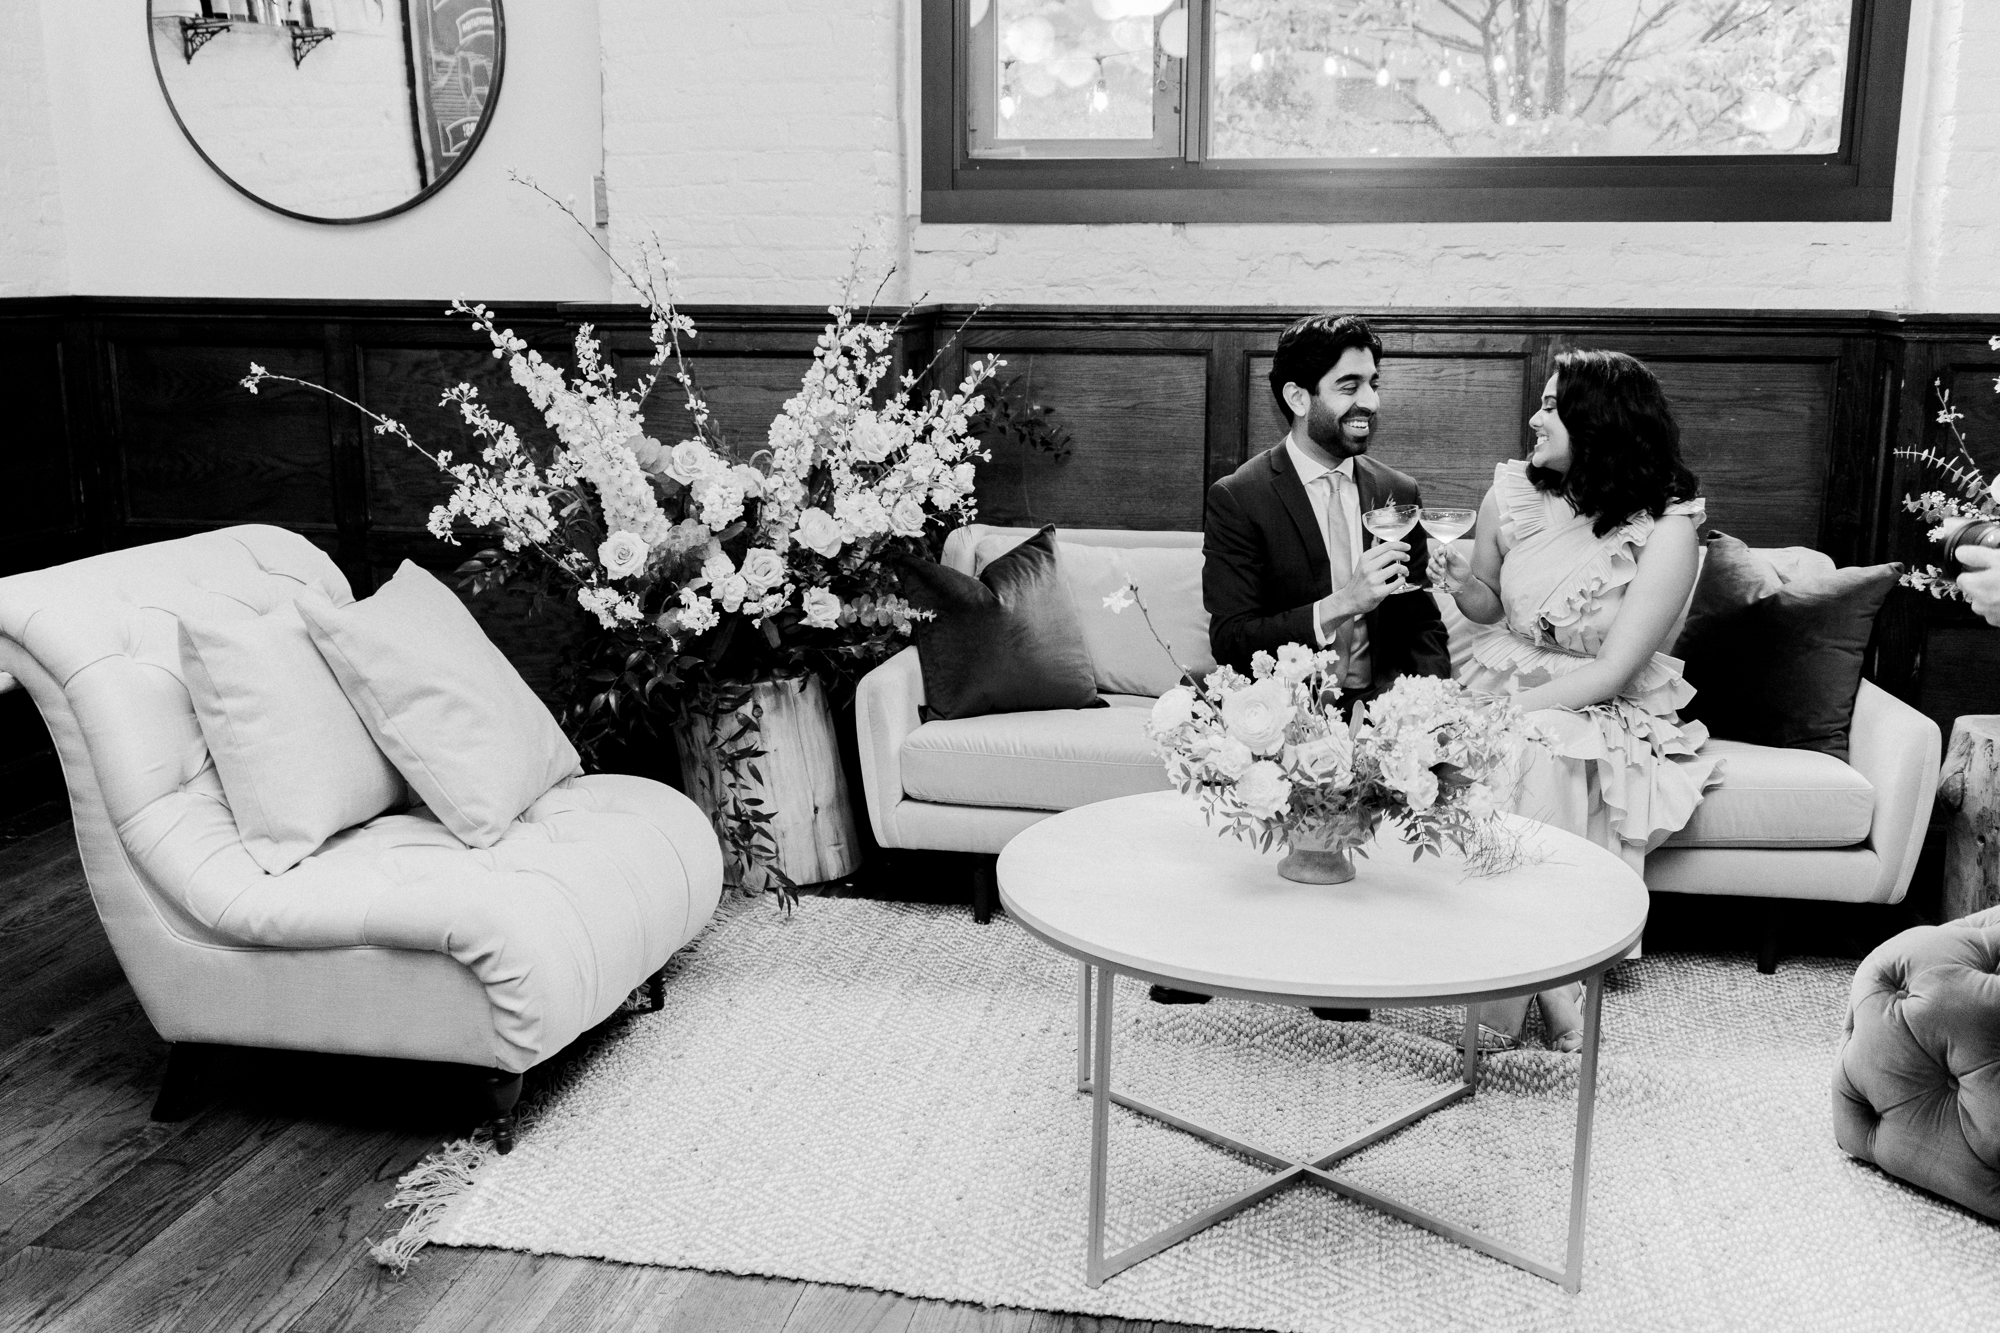 Black and White Brooklyn Winery Wedding Photography Inspiration with Rustic Elements